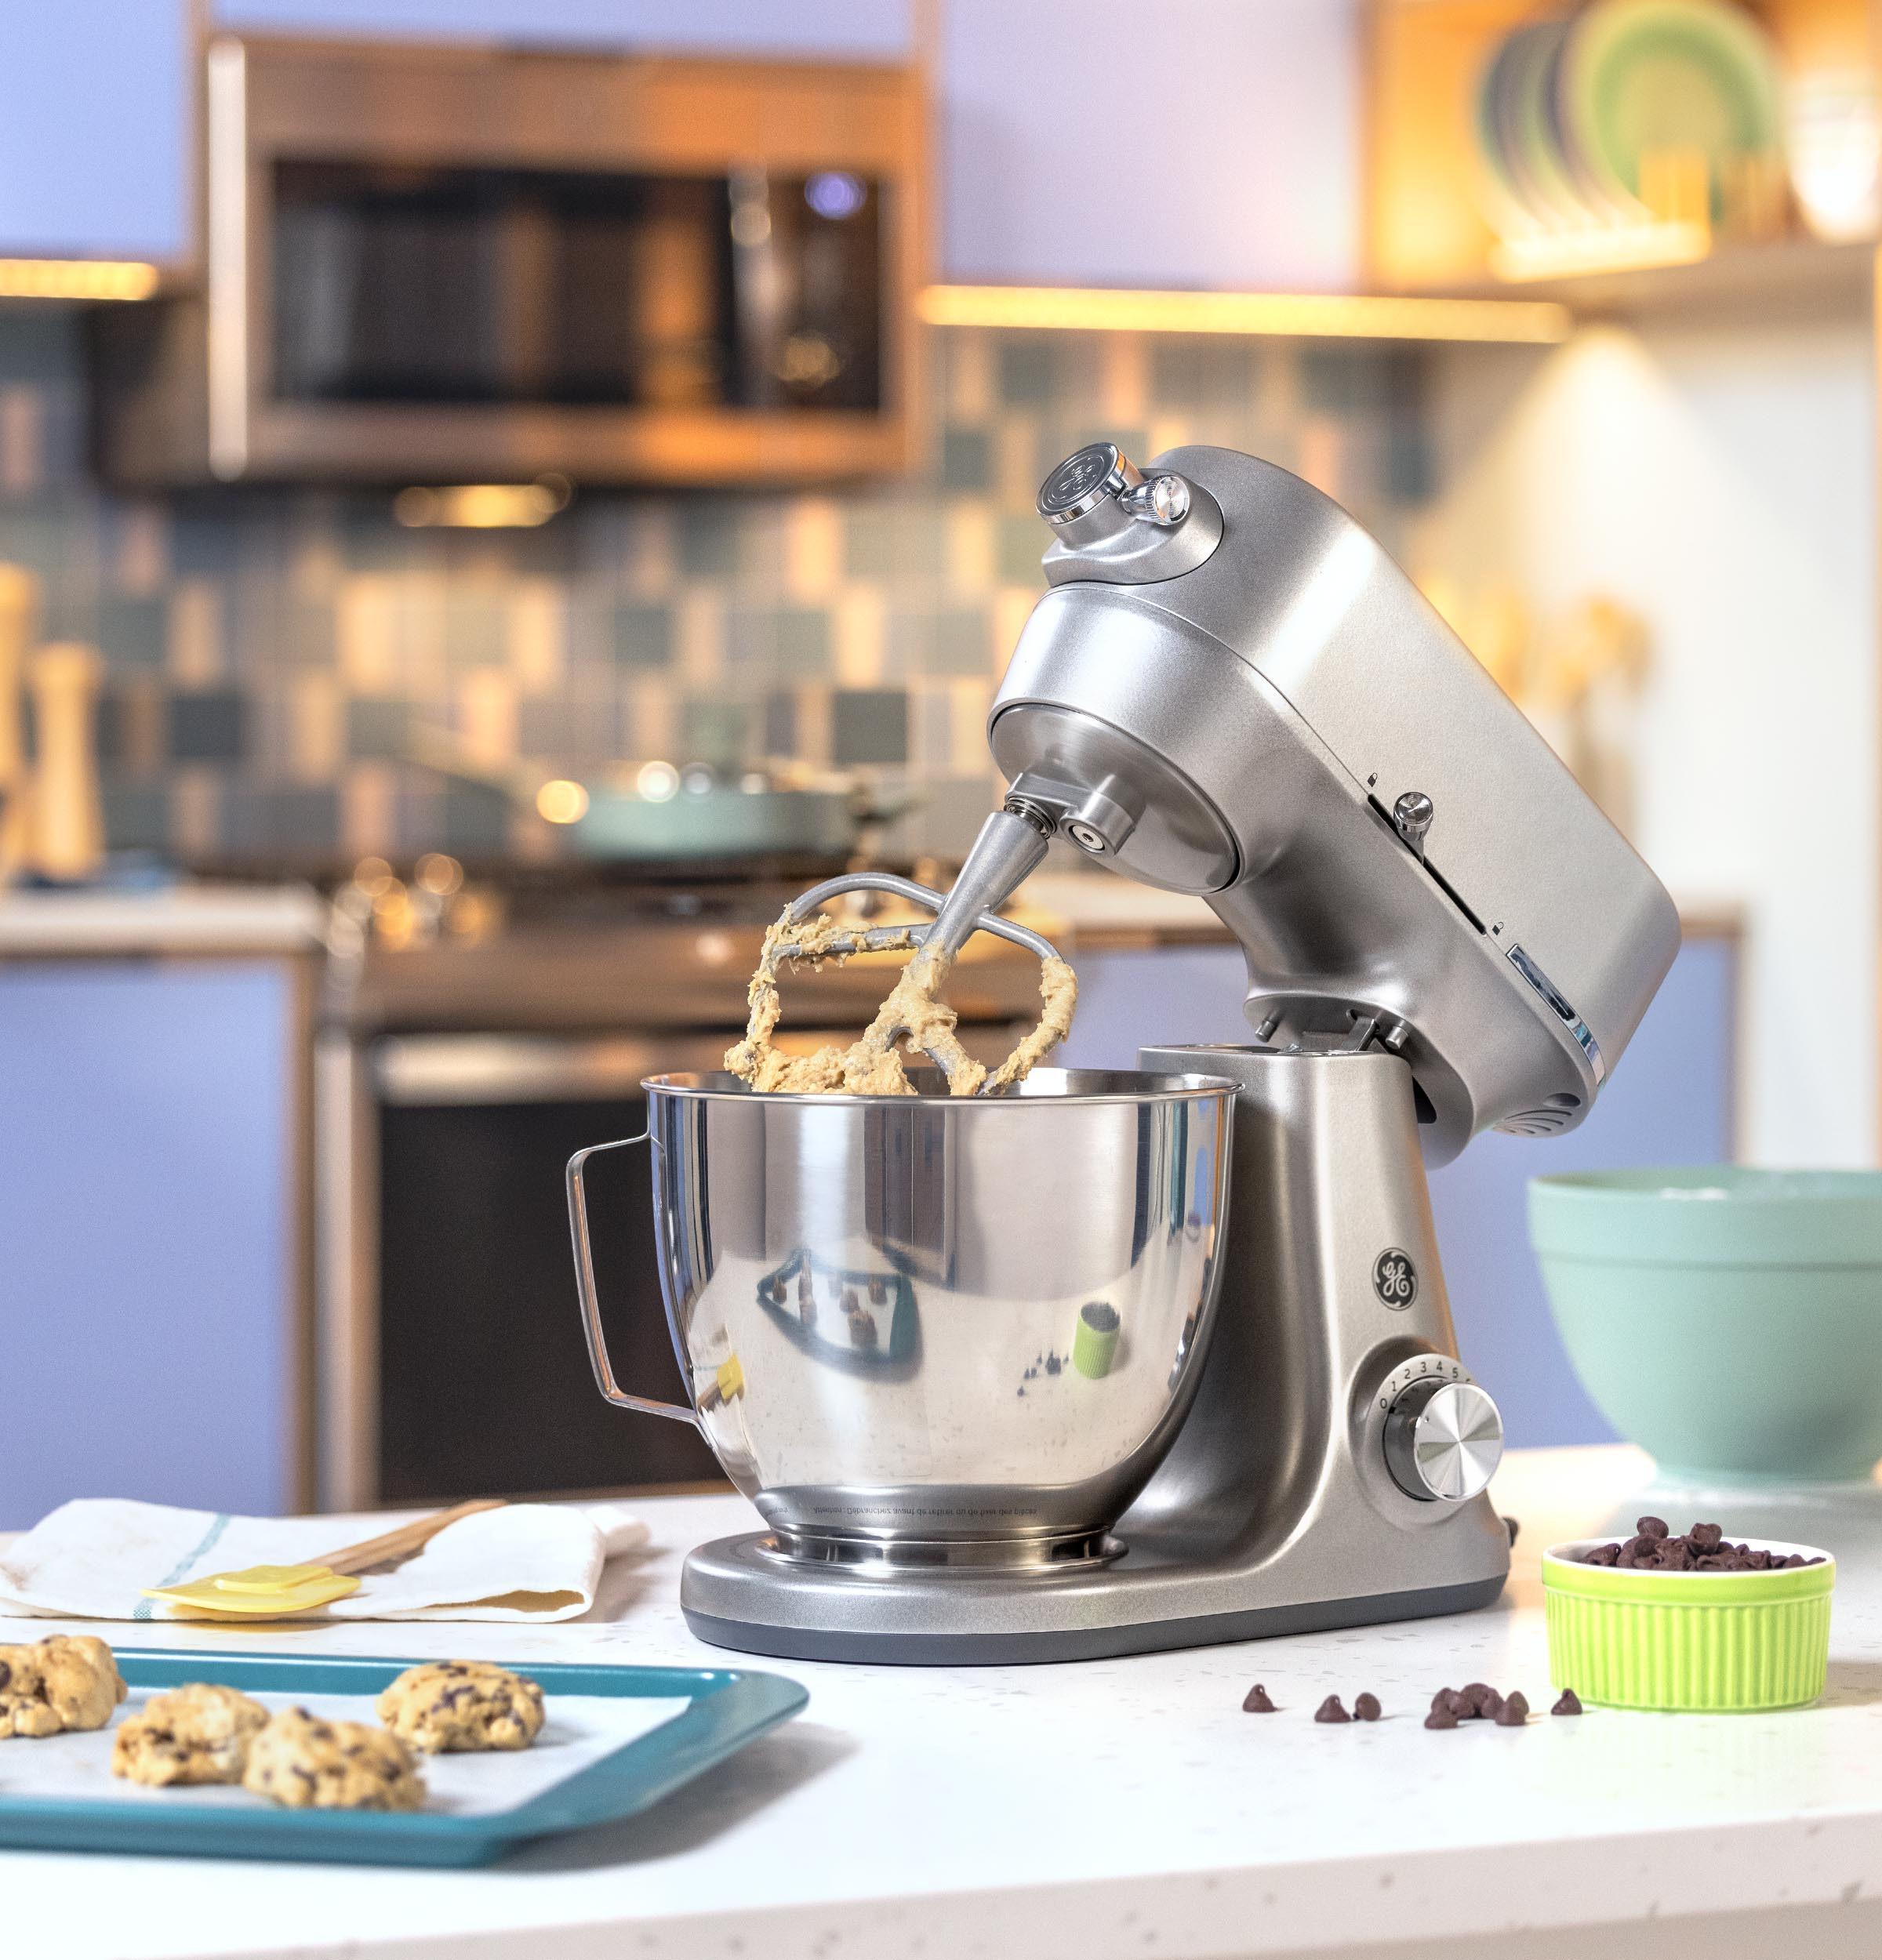 GE Appliances' $1000 stand mixer might actually be worth it